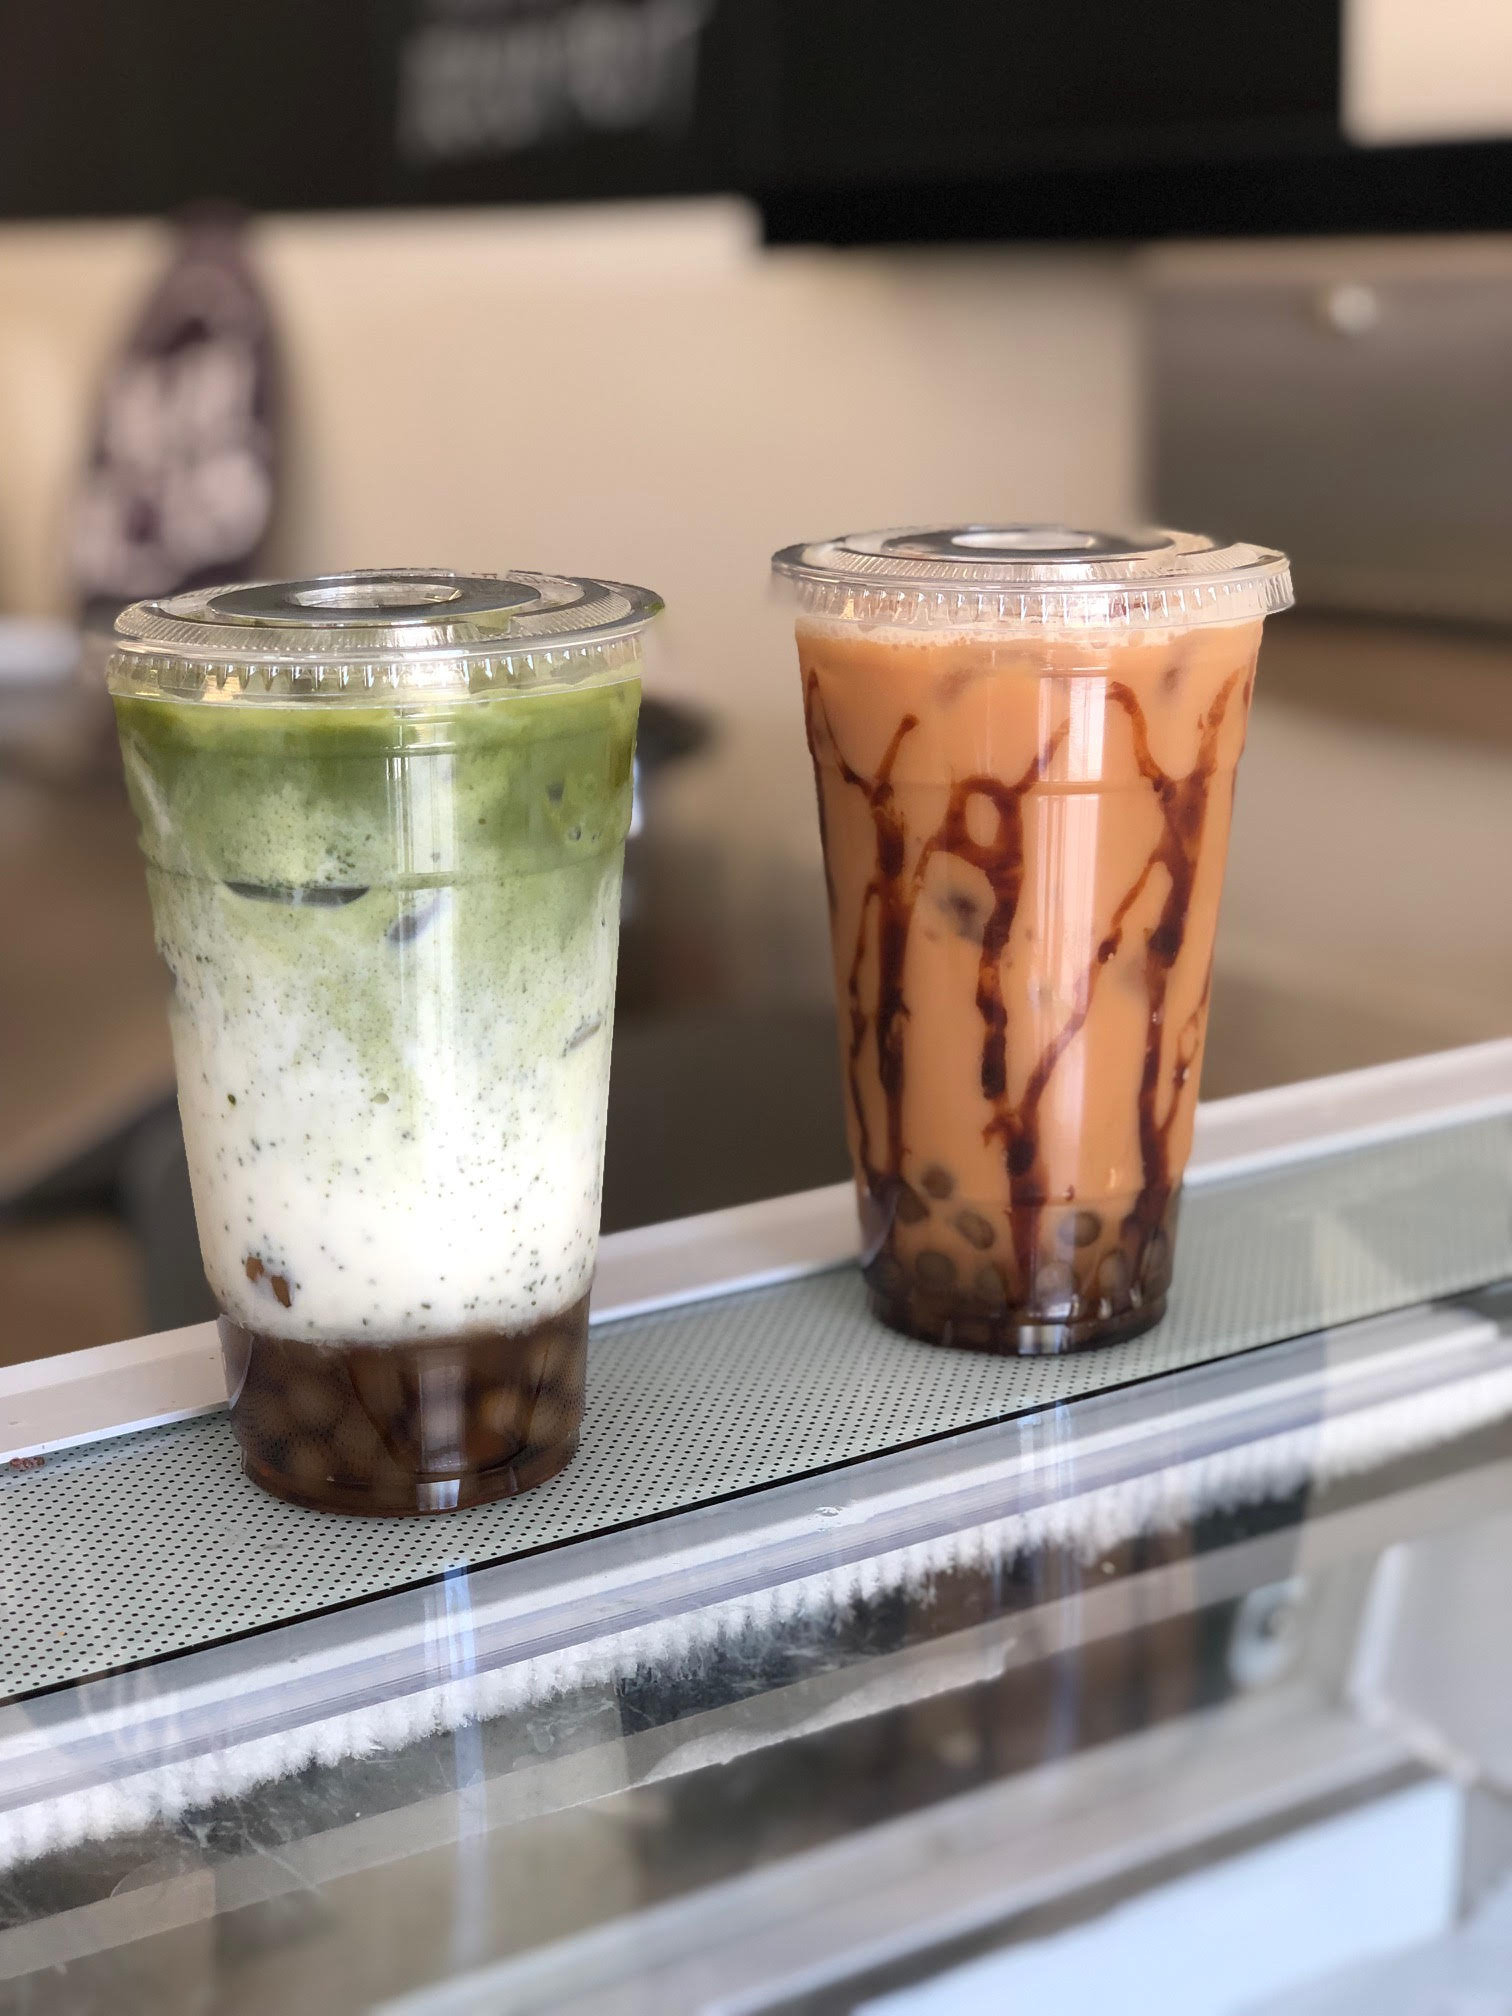 12 boba, bubble tea shops in and around Philly